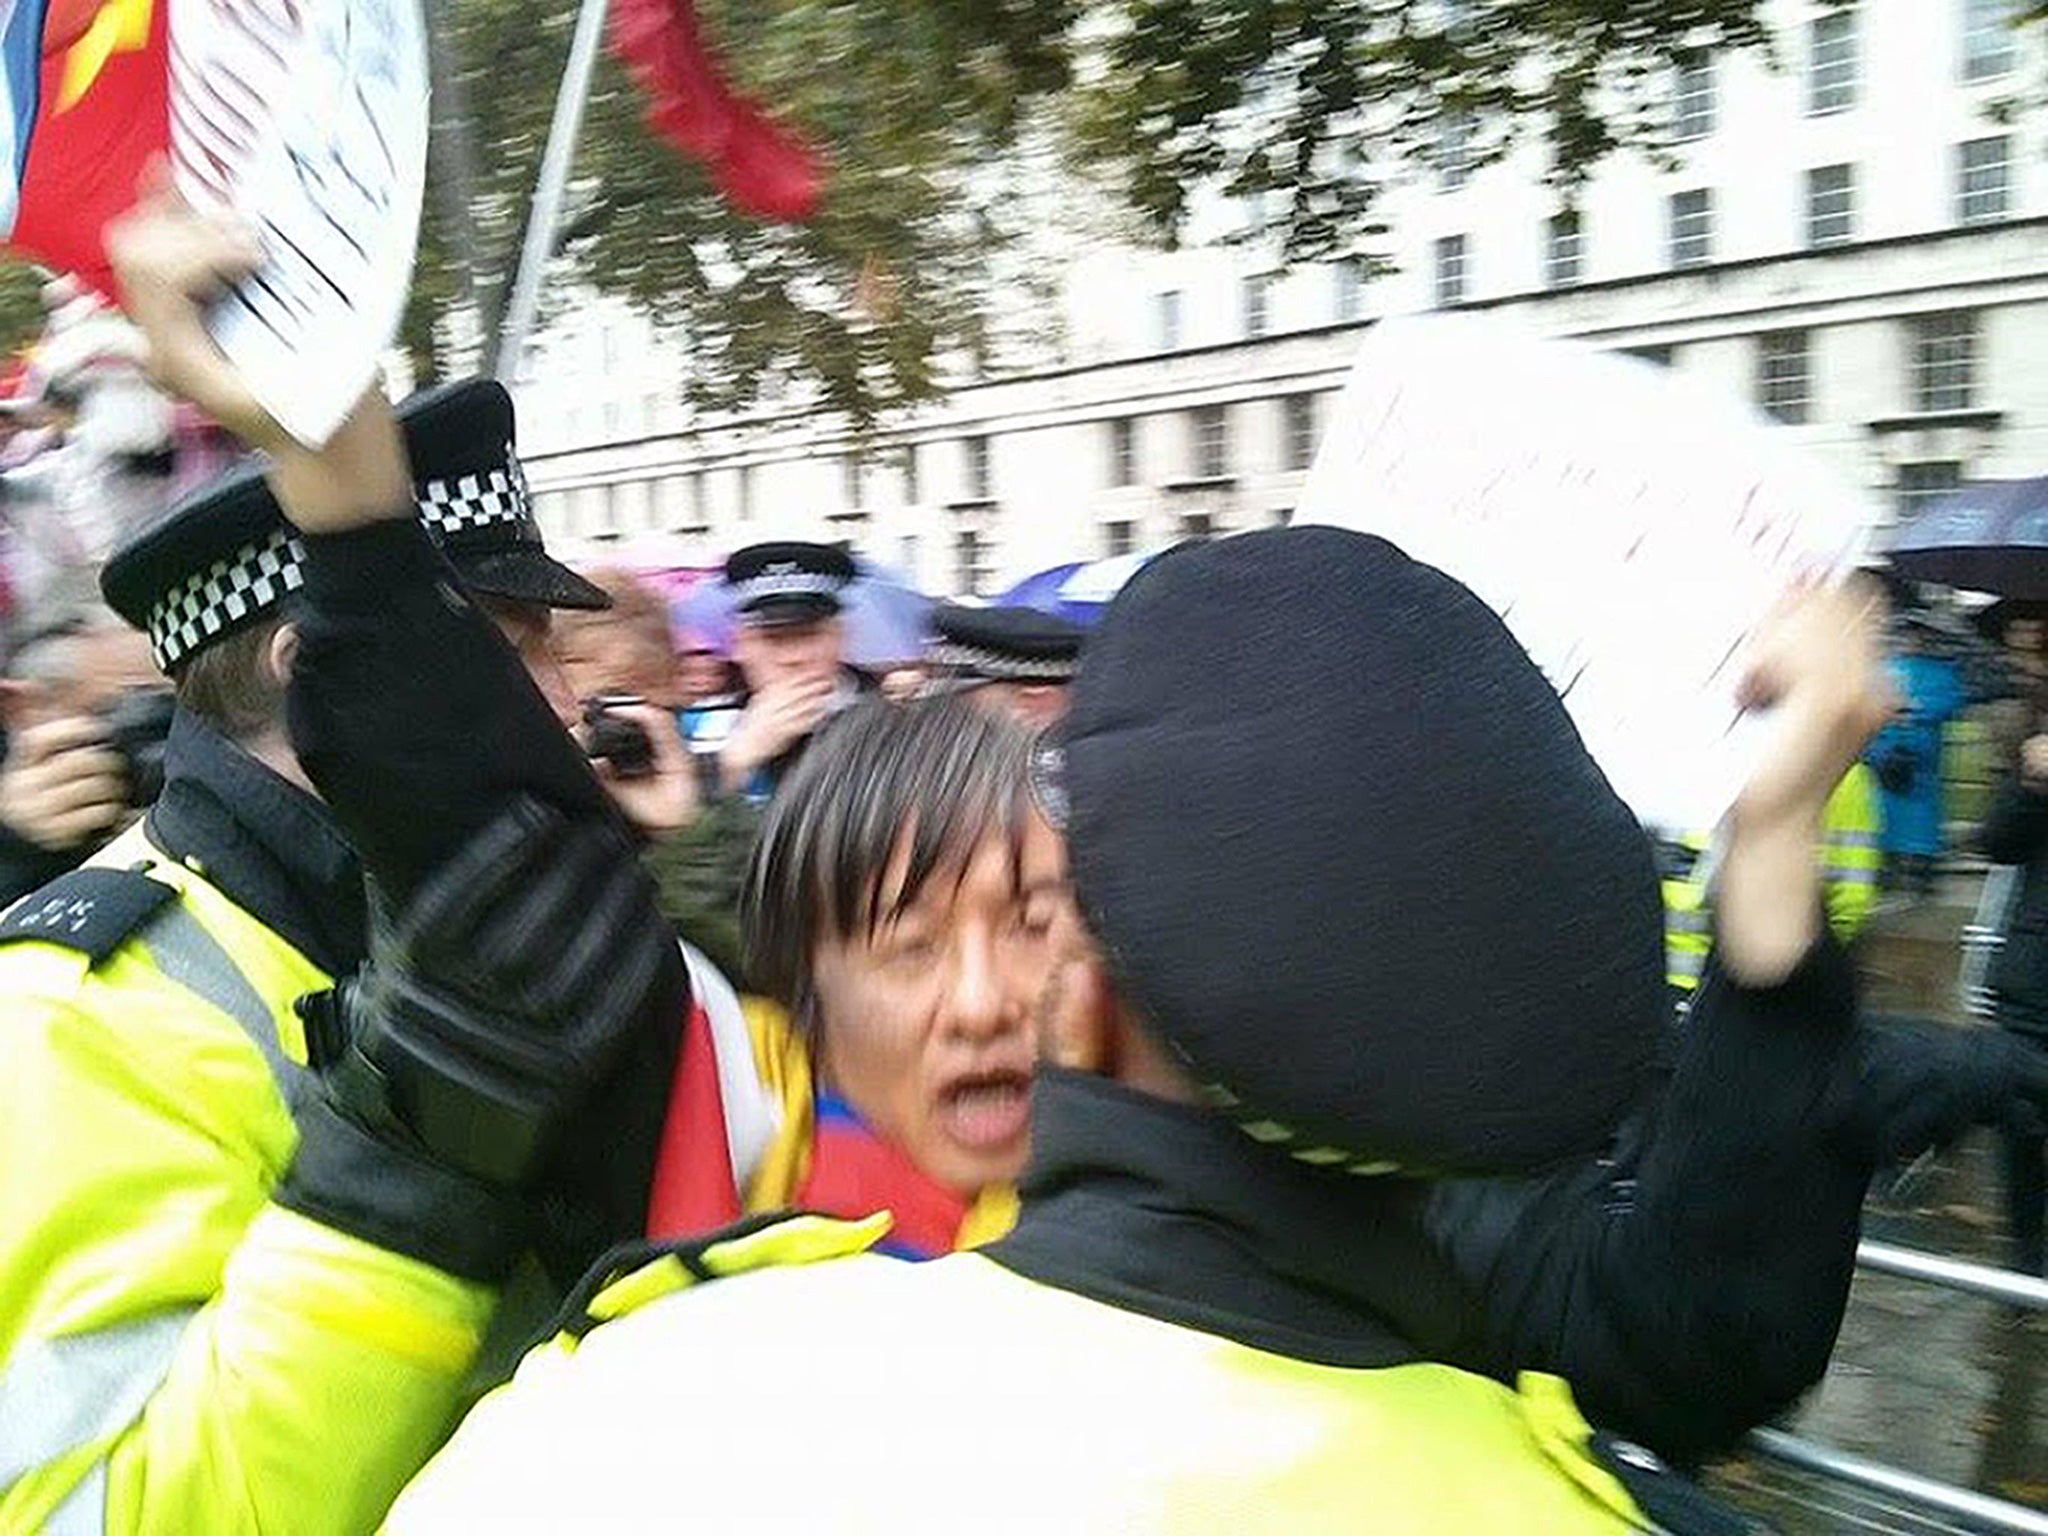 Chinese democracy activist and Tiananmen Square survivor Shao Jiang being led away by police officers. The police were accused of mishandling the 47-year-old away from a human rights protest before raiding his home